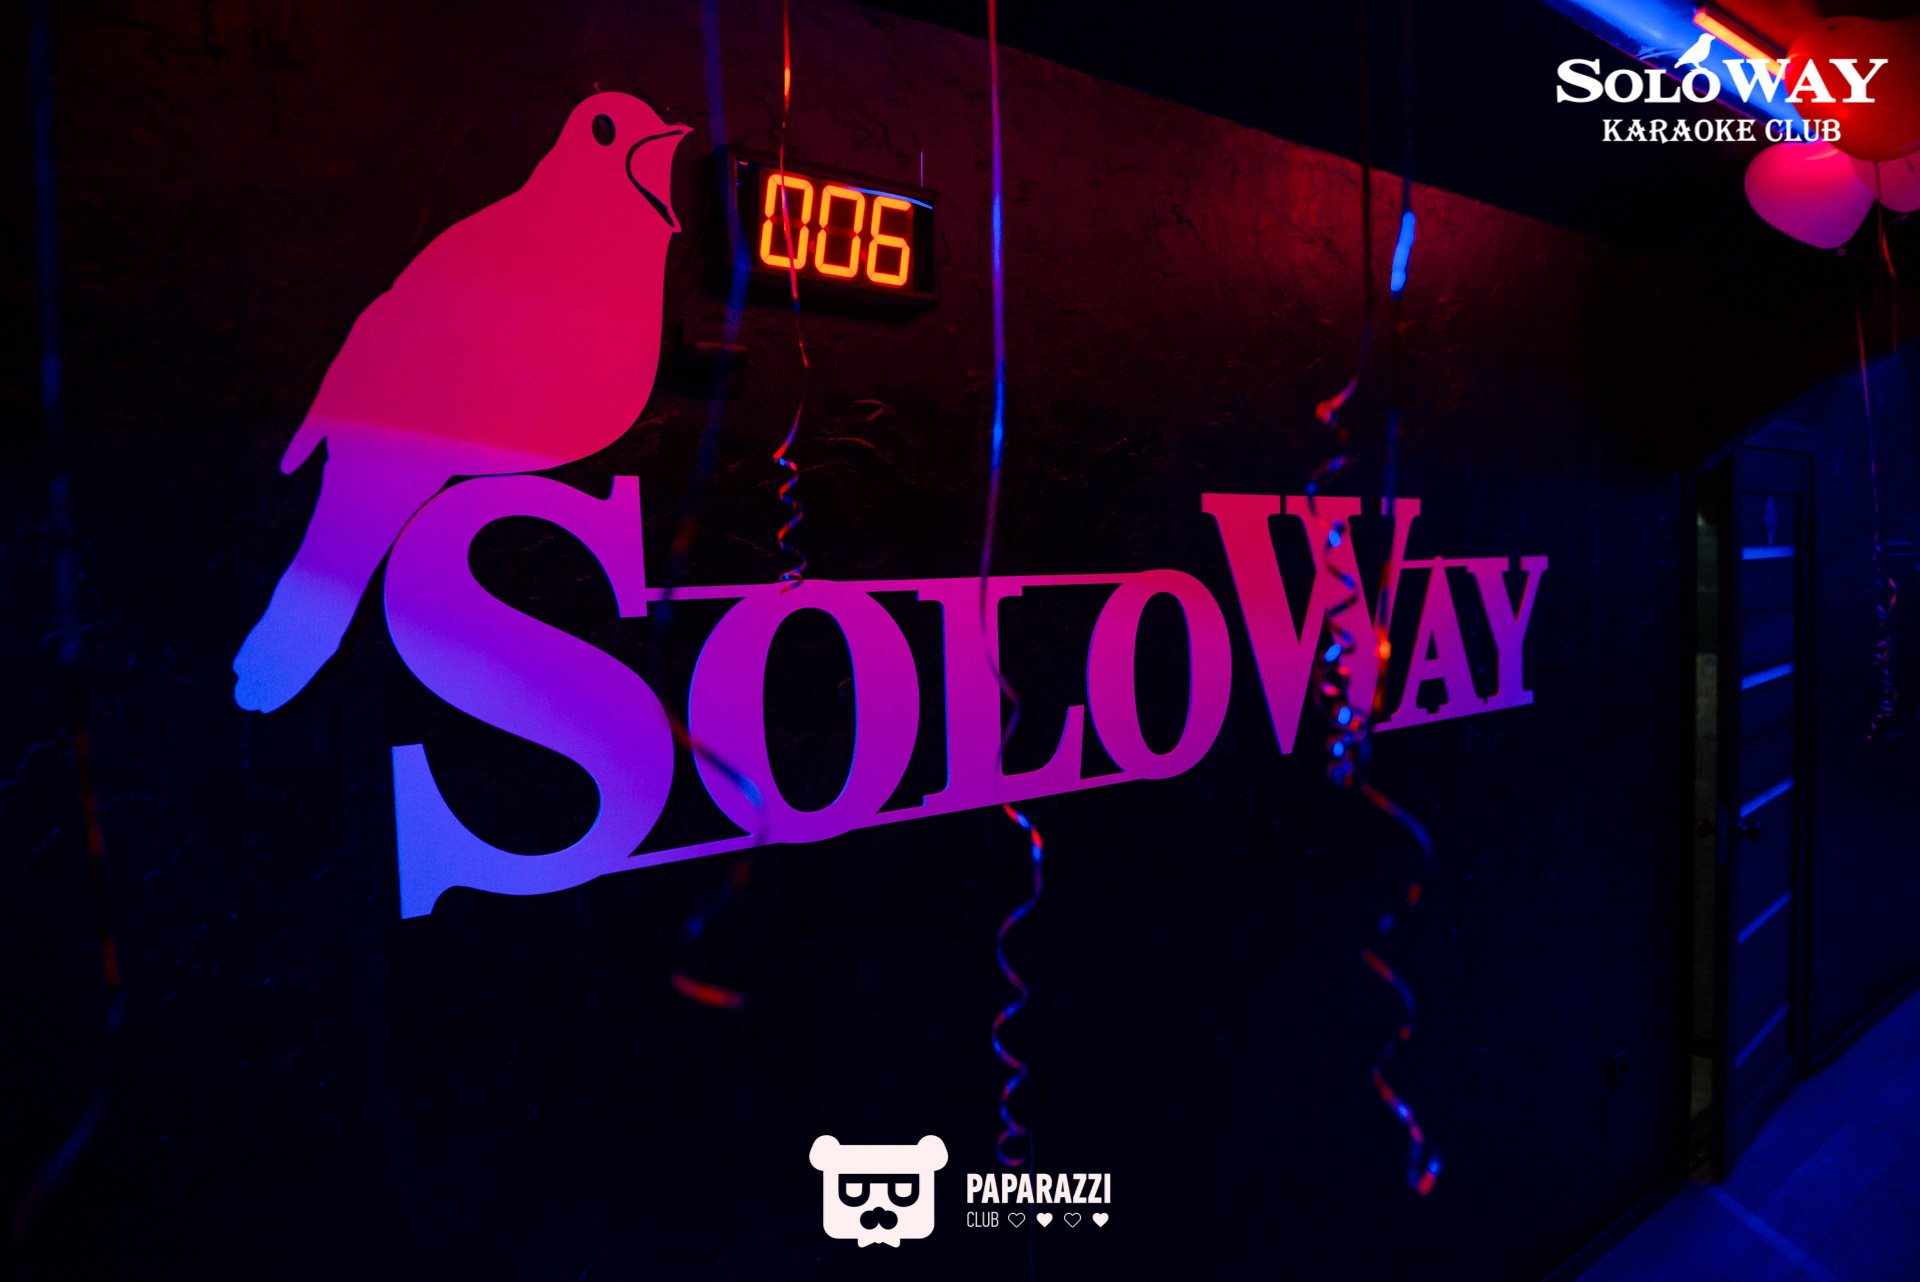 "Soloway"